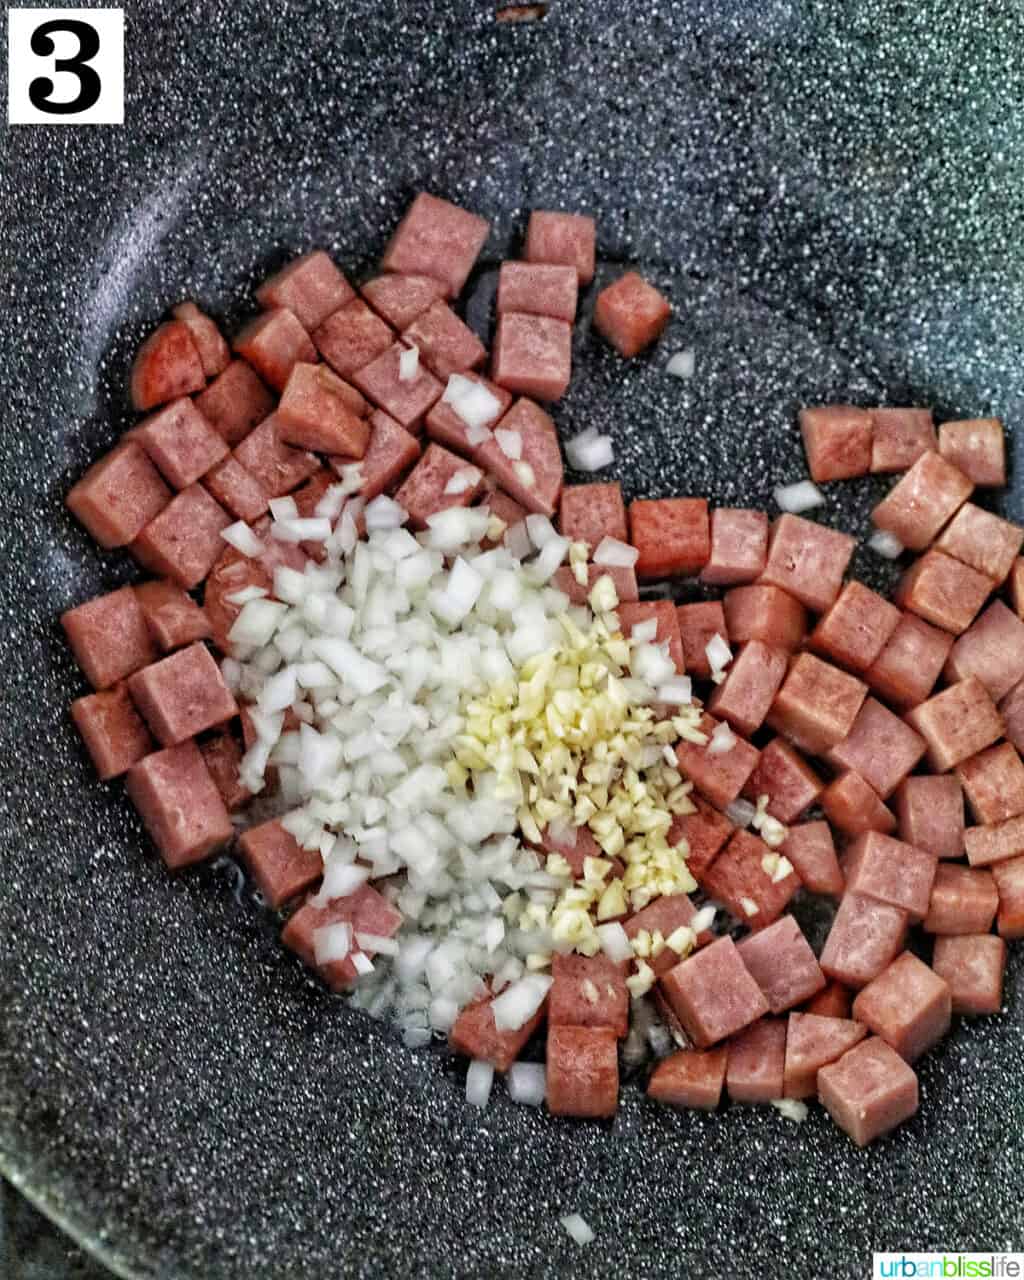 cooking cubed spam, garlic, and onions in a wok.